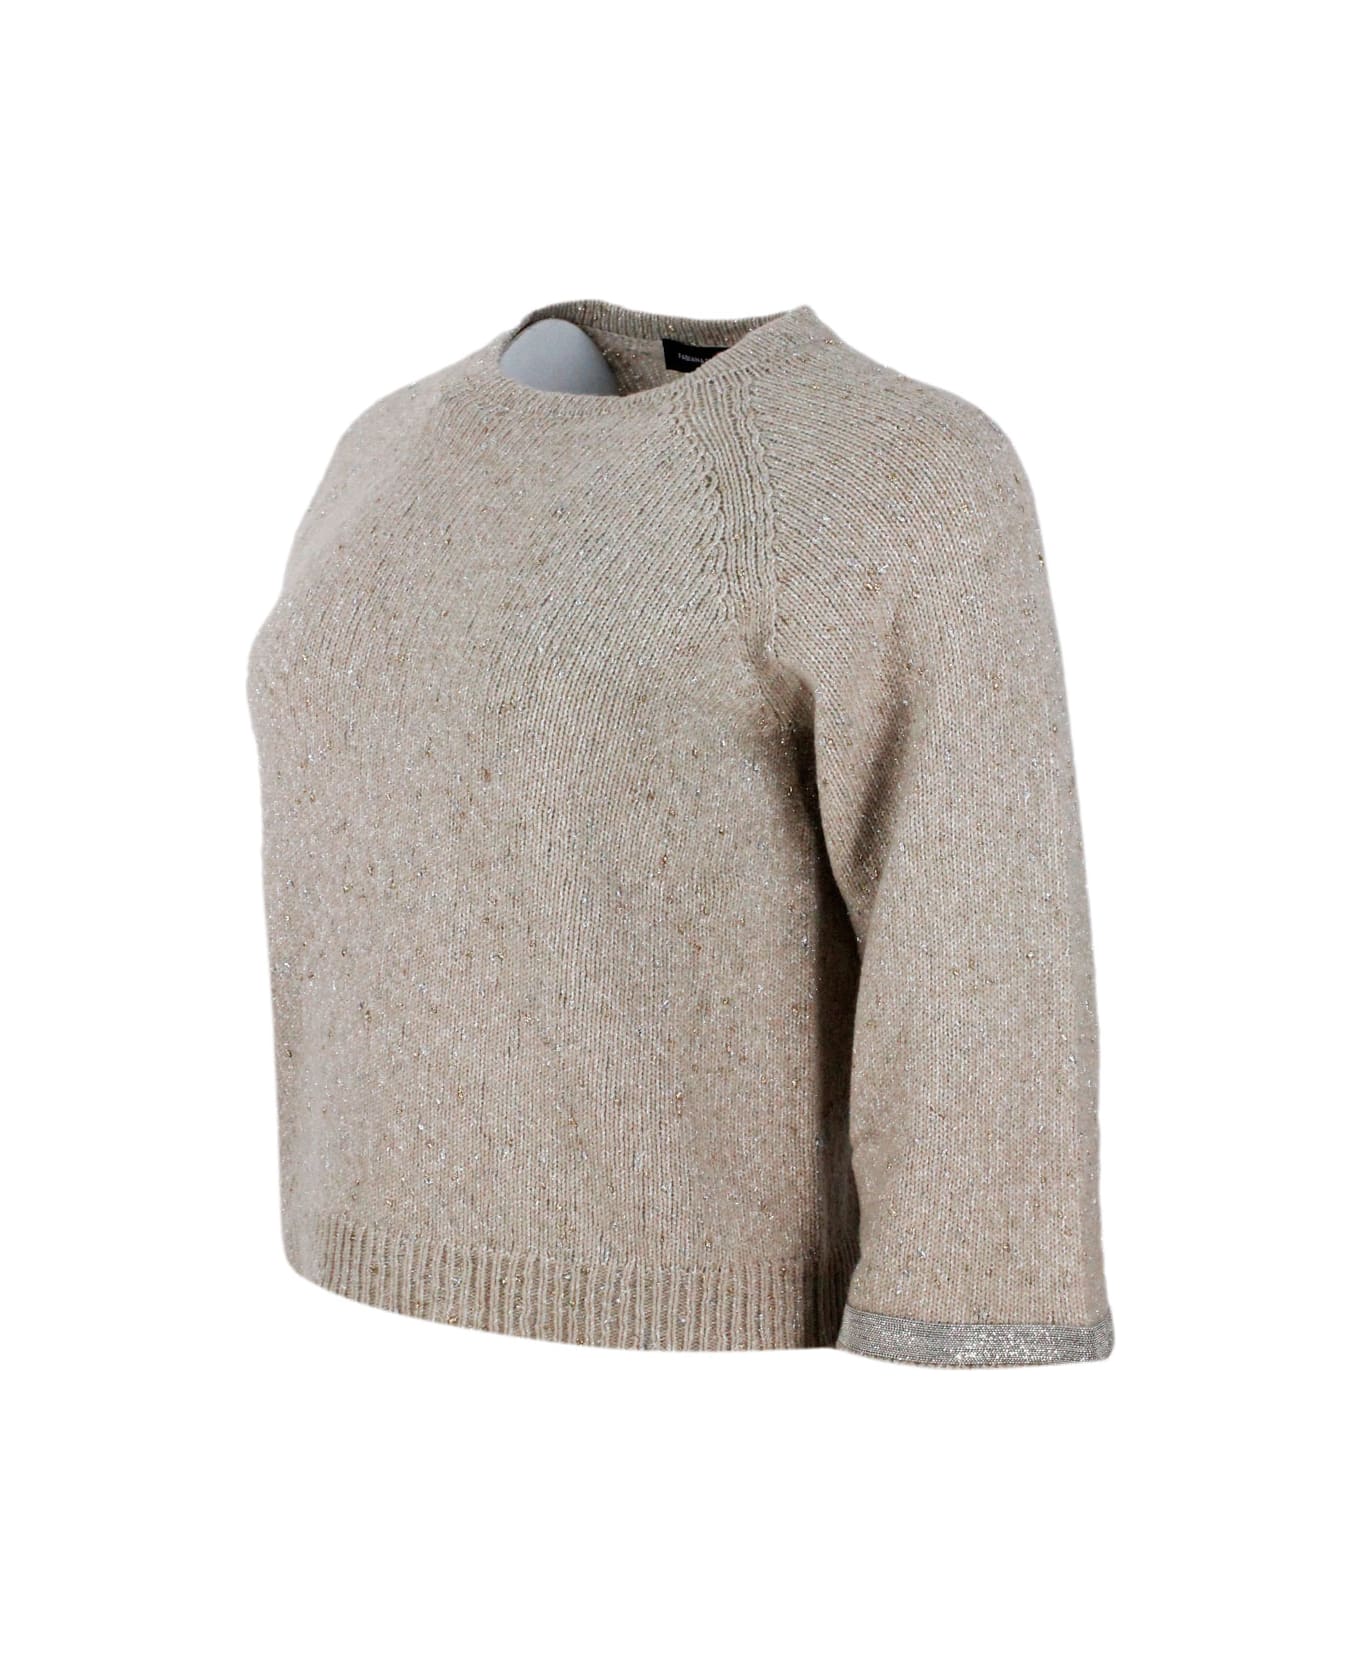 Fabiana Filippi Crewneck Sweater In Donegal Lamè Yarn With 3/4 Sleeves Embellished With Brilliant Jewel Details On The Sleeves - Beige ニットウェア